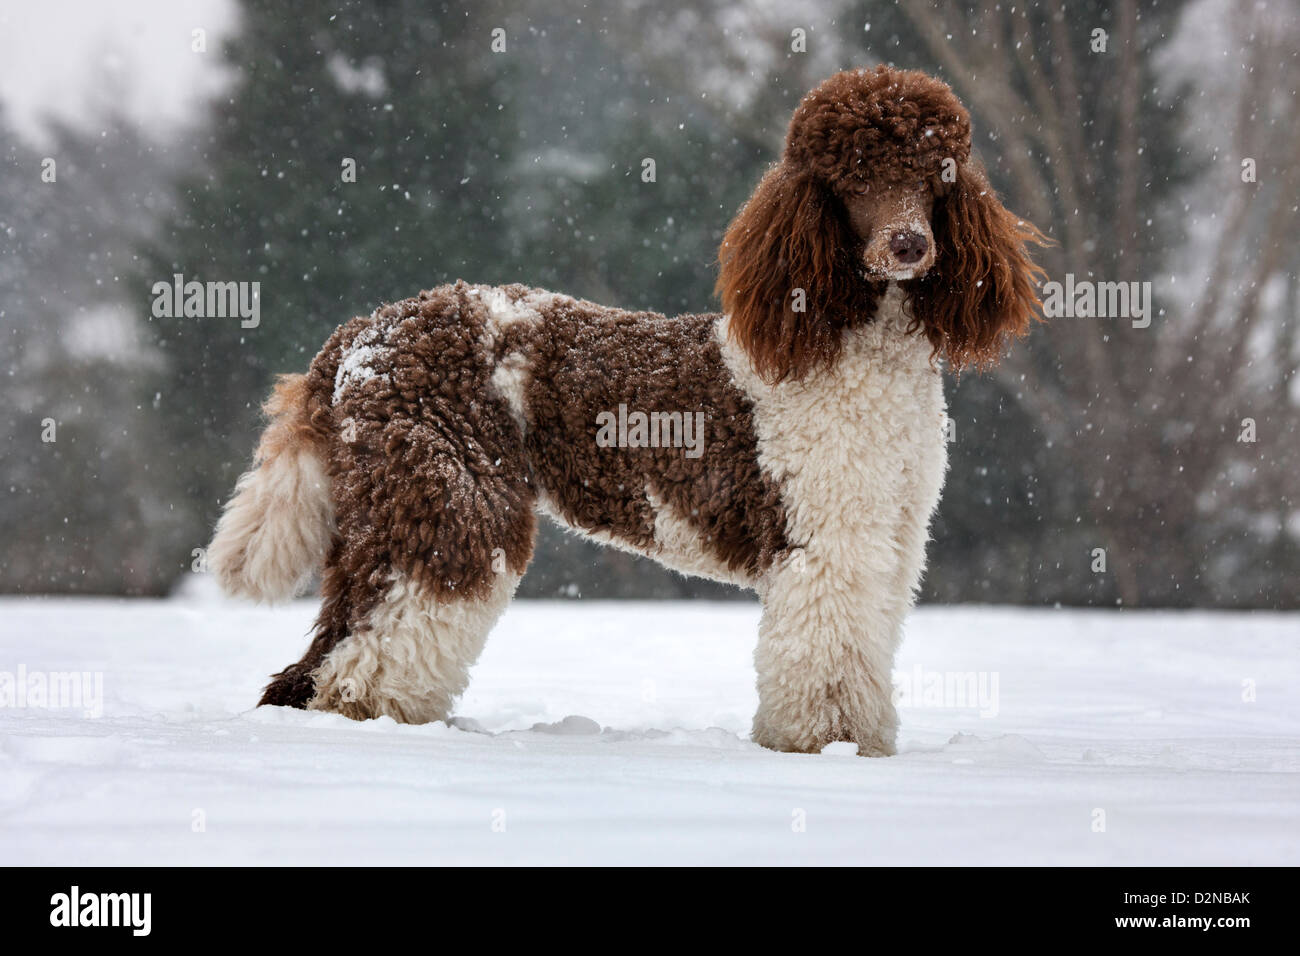 Standard poodle in the snow during snowfall in winter Stock Photo